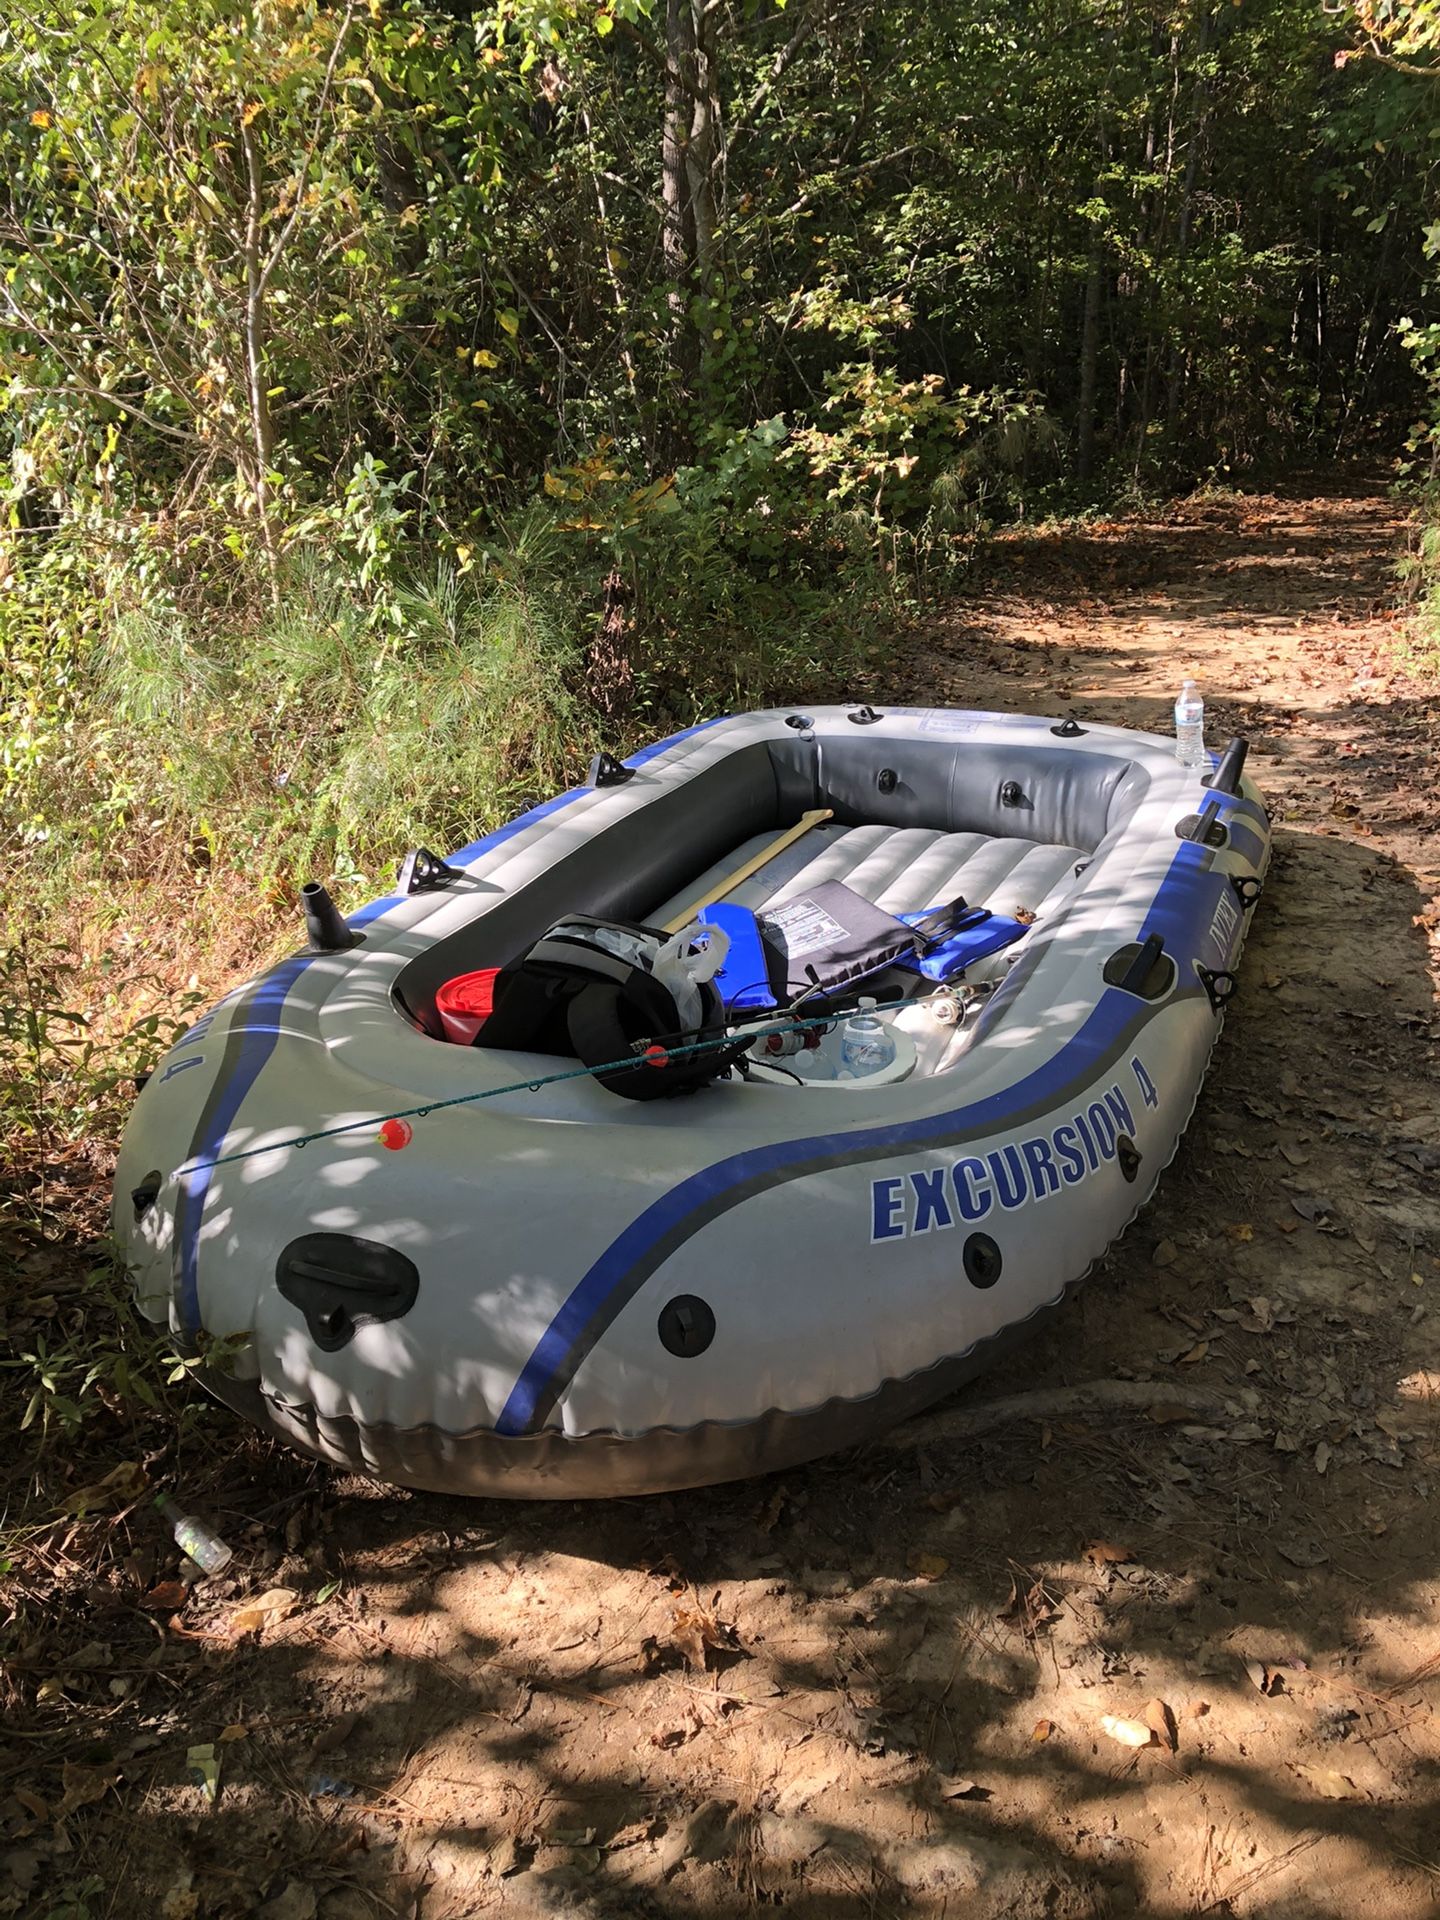 Inter Excursion 4 Inflatable Fishing Boat w/ electric pump. Floats great but has a slow leak near front. Will hold air for over an hour and a half be